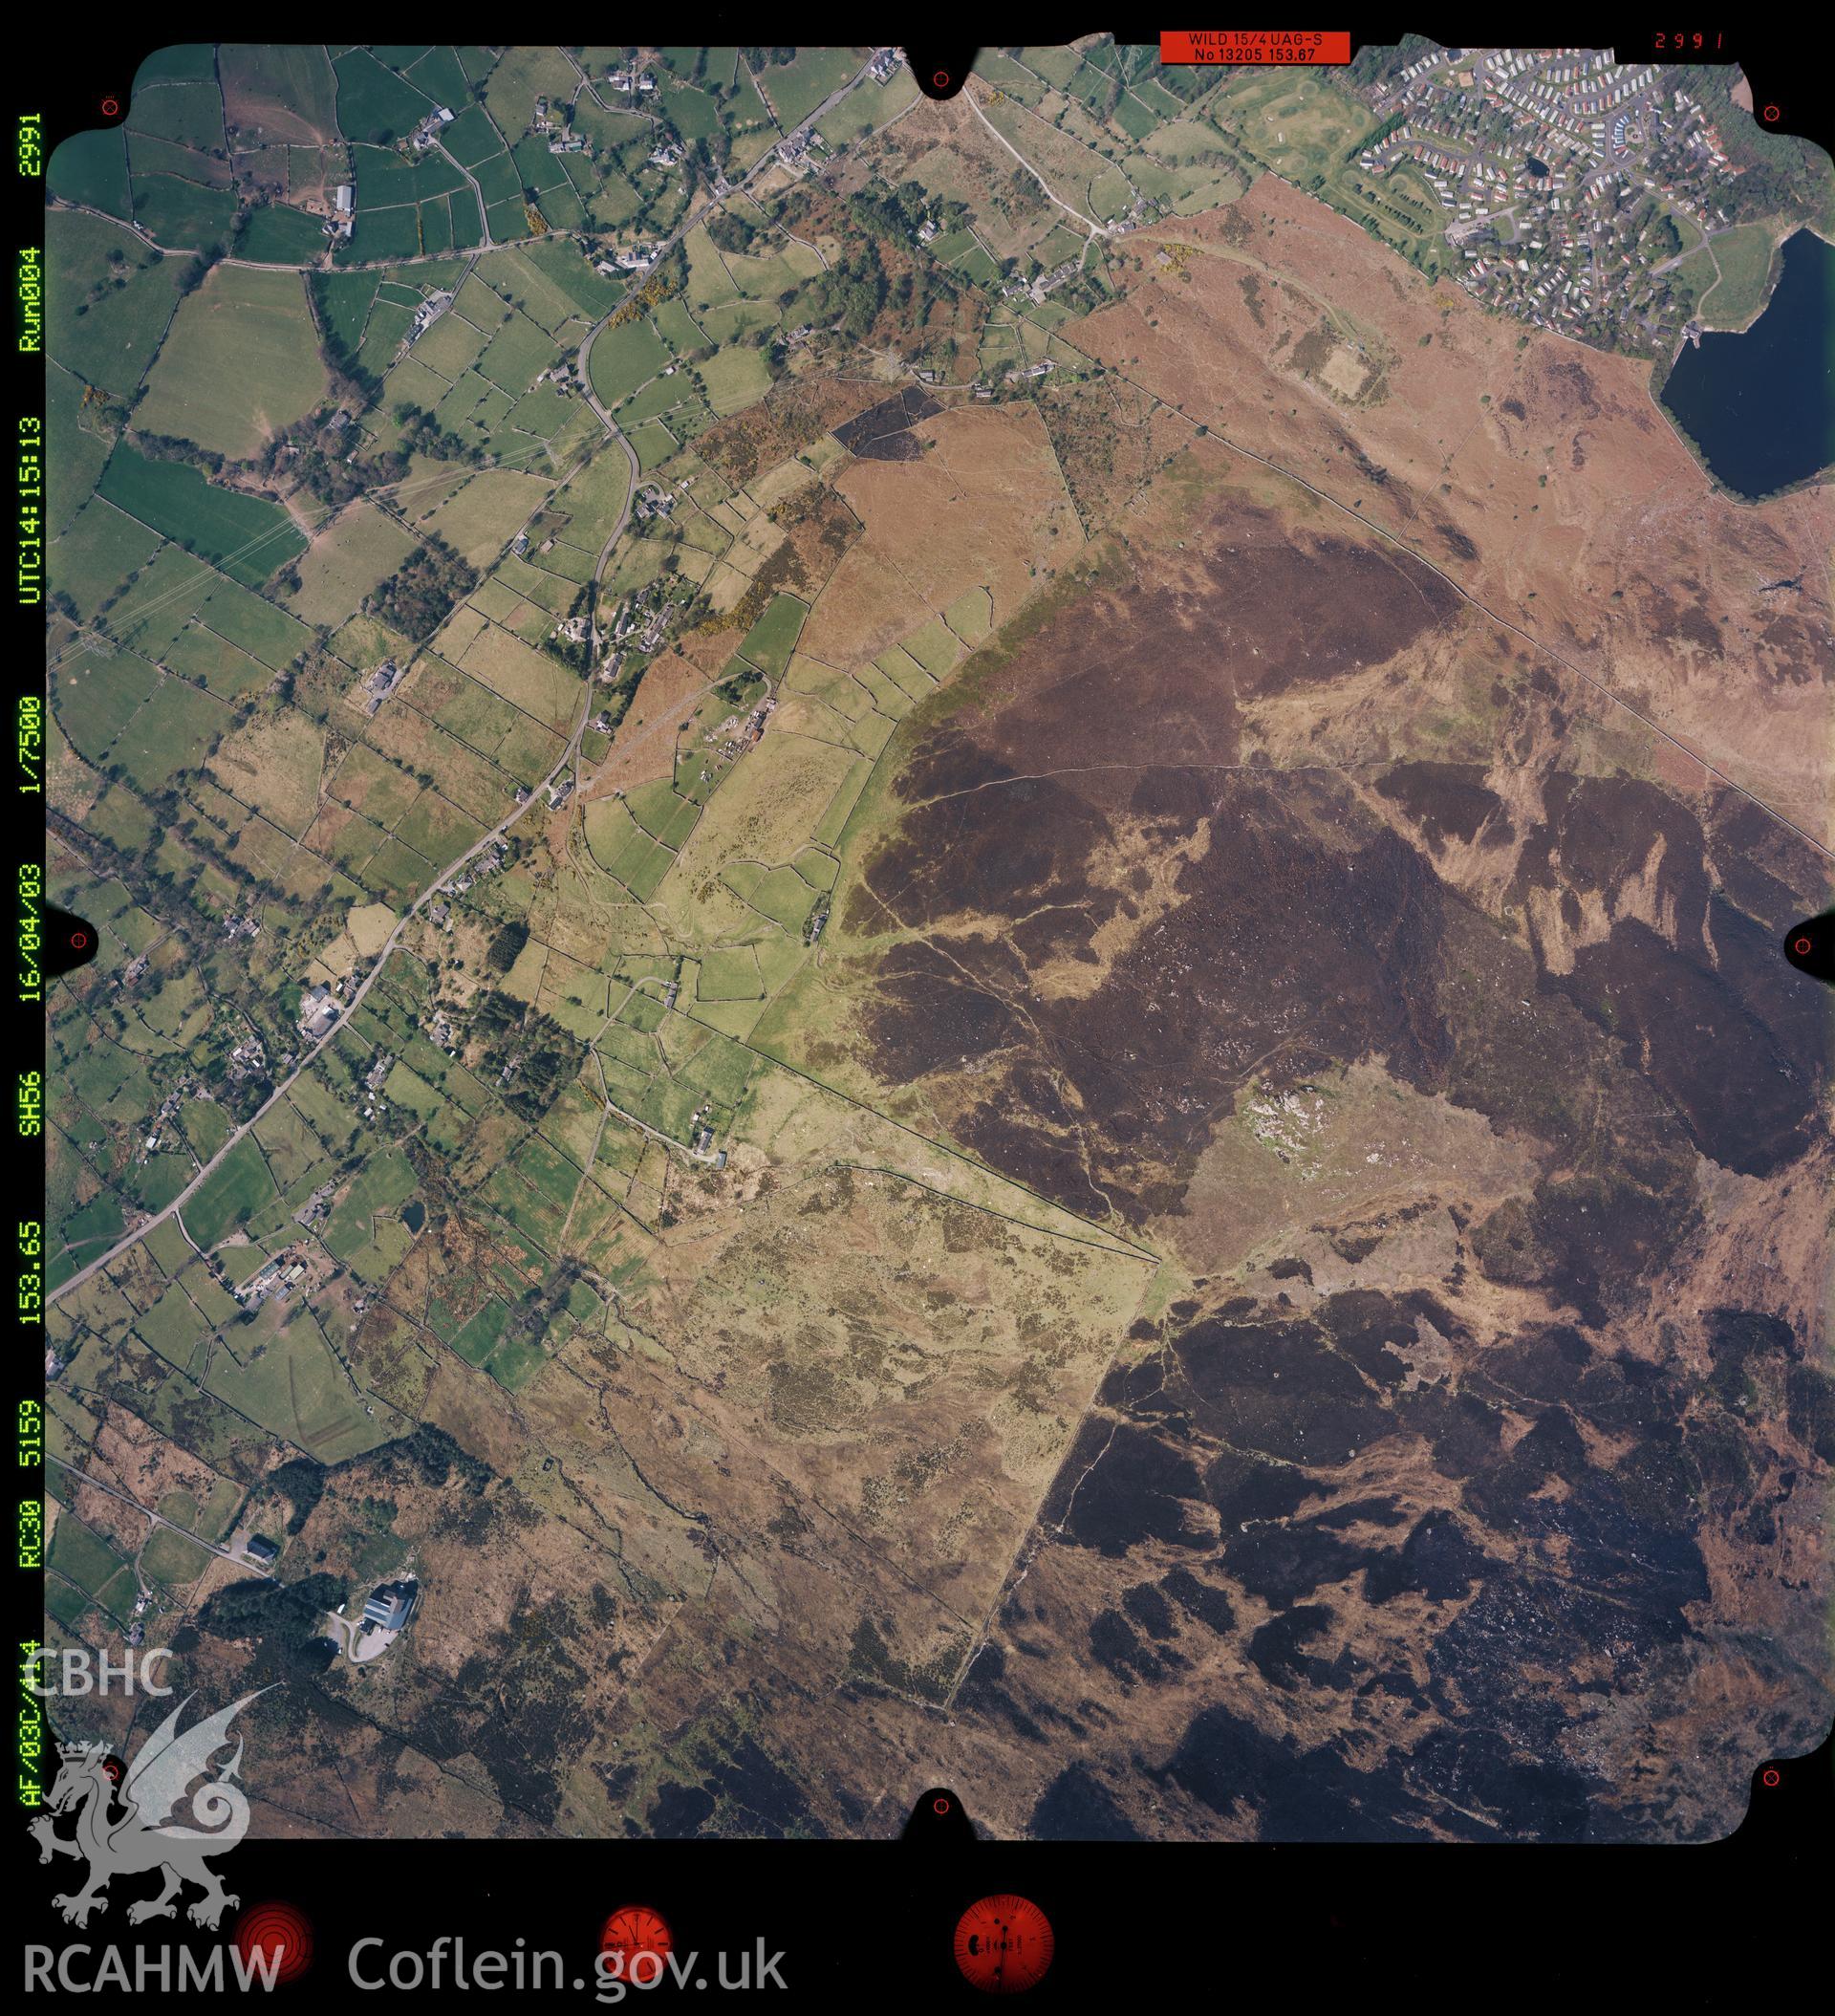 Digital copy of an aerial view of the Ceunant area SH5366 6122 taken by Ordnance Survey in 2003.